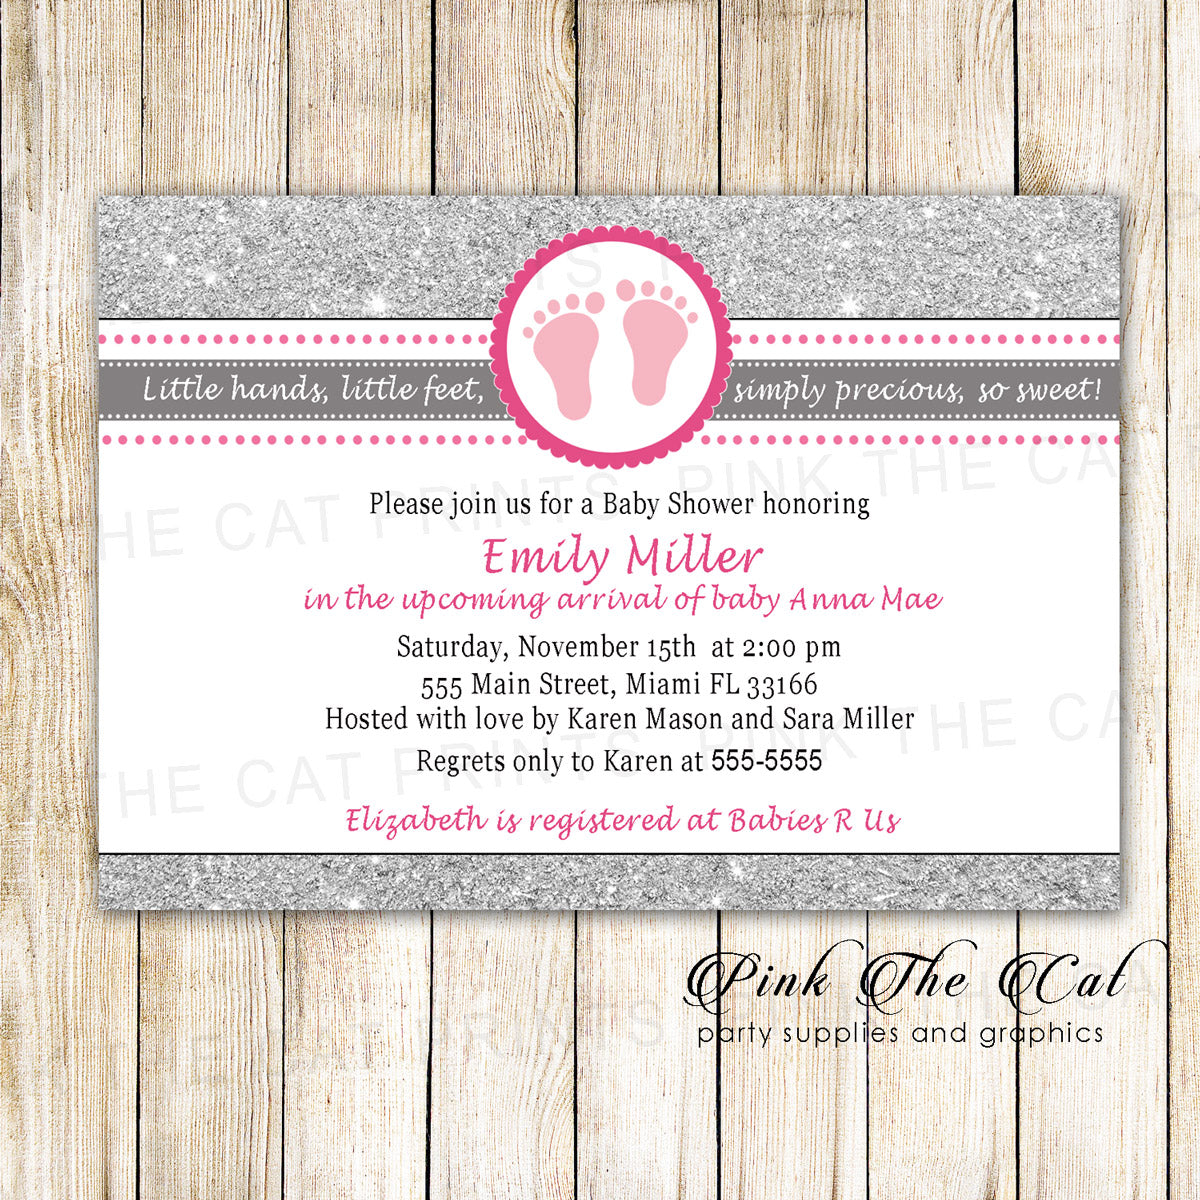 Footprints Invitation Glitter Silver Pink Baby Shower printed cards